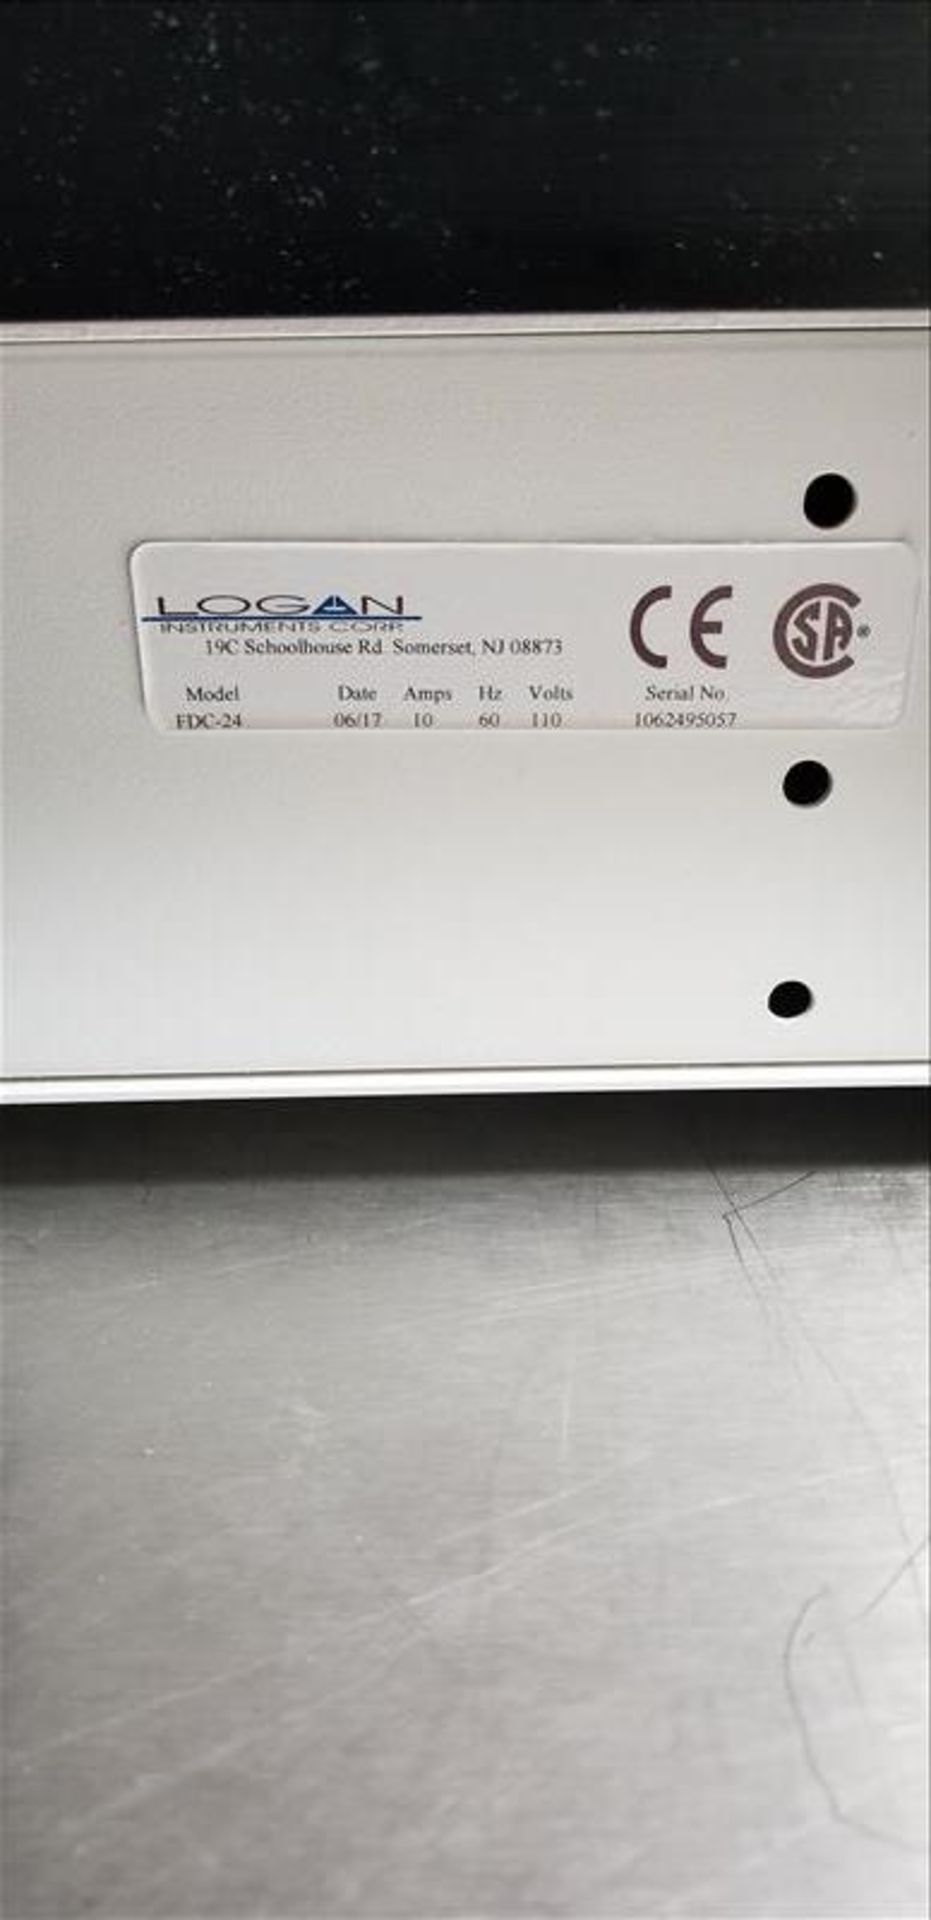 Logan FDC-24 Dry Heat Transdermal Diffusion Cell Drive Console - Image 4 of 4